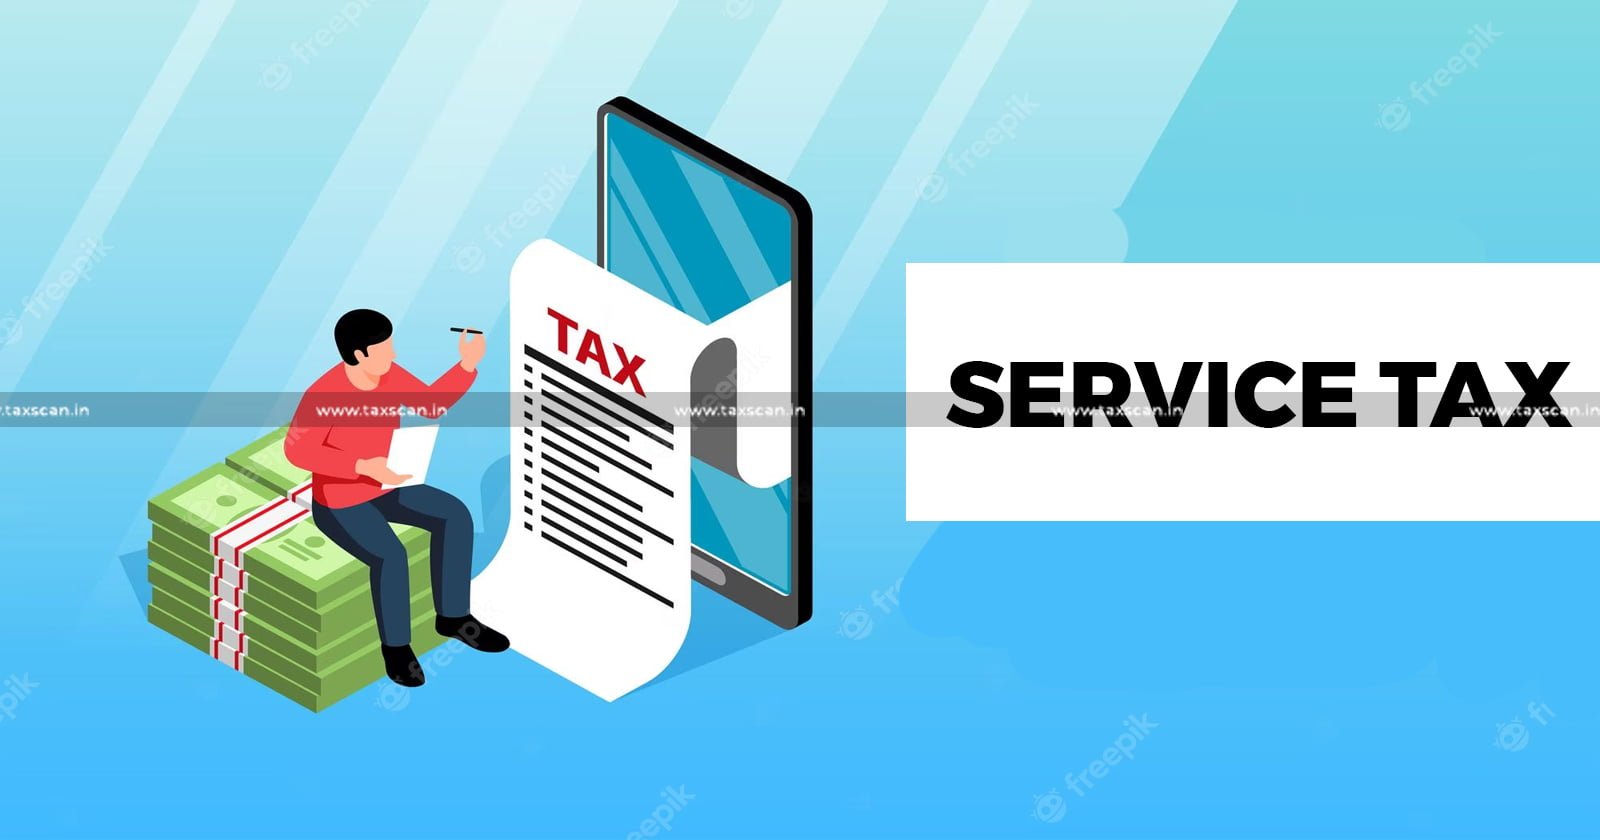 CESTAT- Service Tax Rules -Banking charges- Invoice- Service Tax -Input service distributor- excise- customs-taxscan